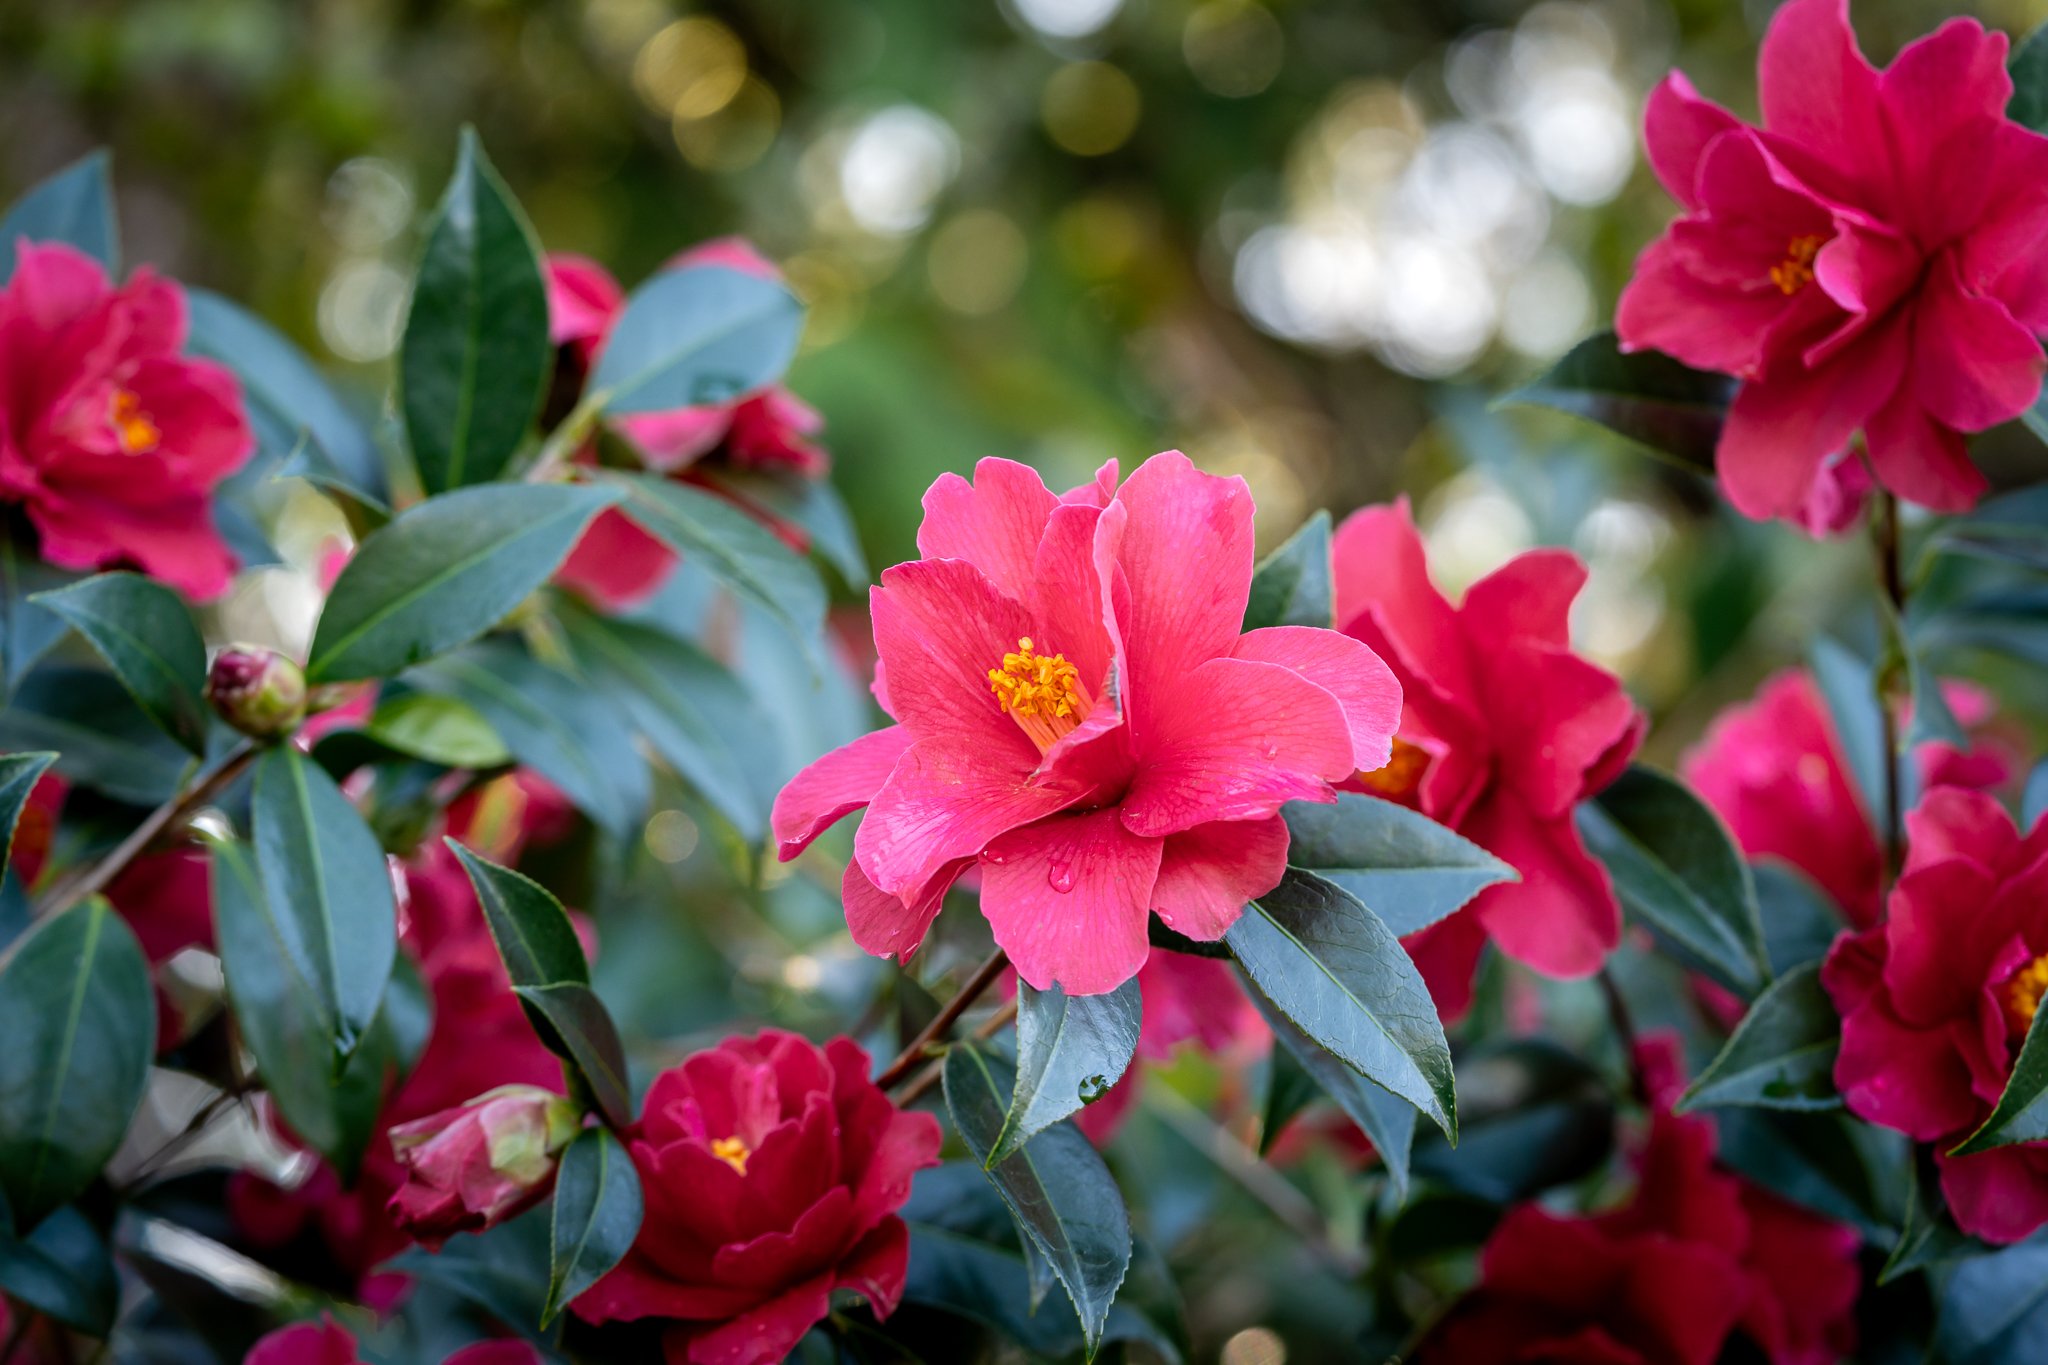 Flowers are popping all over the Seattle area, but it was this beautiful rose of winter that captured my heart at the @bellevuebotanical. 

📍 Belleveue Botanical Gardens
📷 @sonyalpha a7rV + 90 mm macro

#camellia #bellevuebotanicalgarden #flowerpho